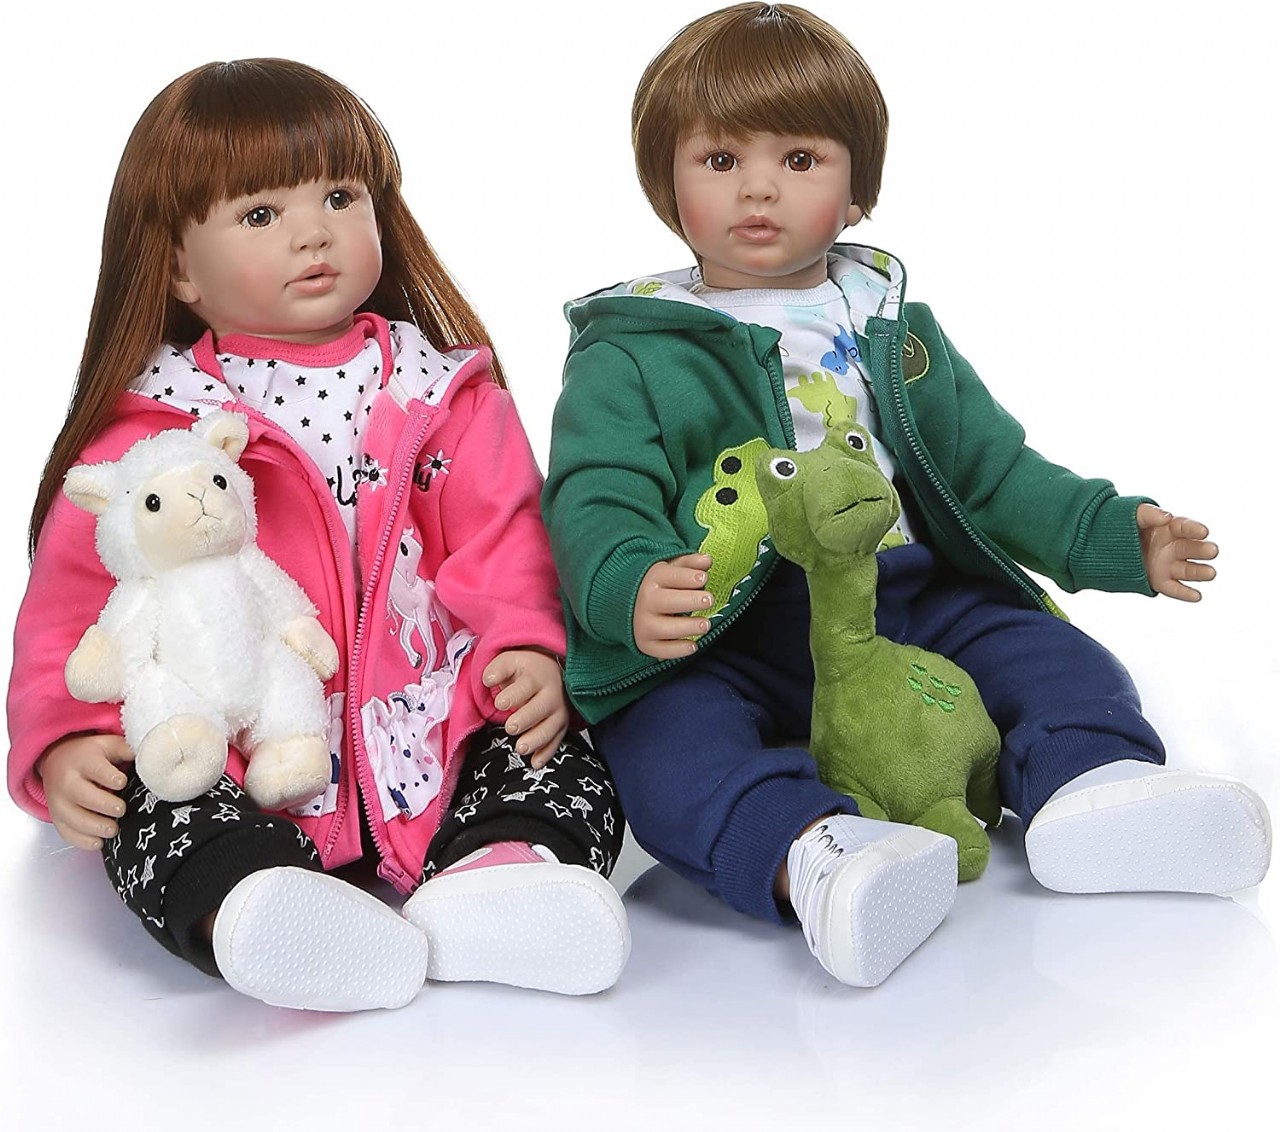 Reborn Baby Dolls Toddlers Twins Boy and Girl Realistic Soft Silicone